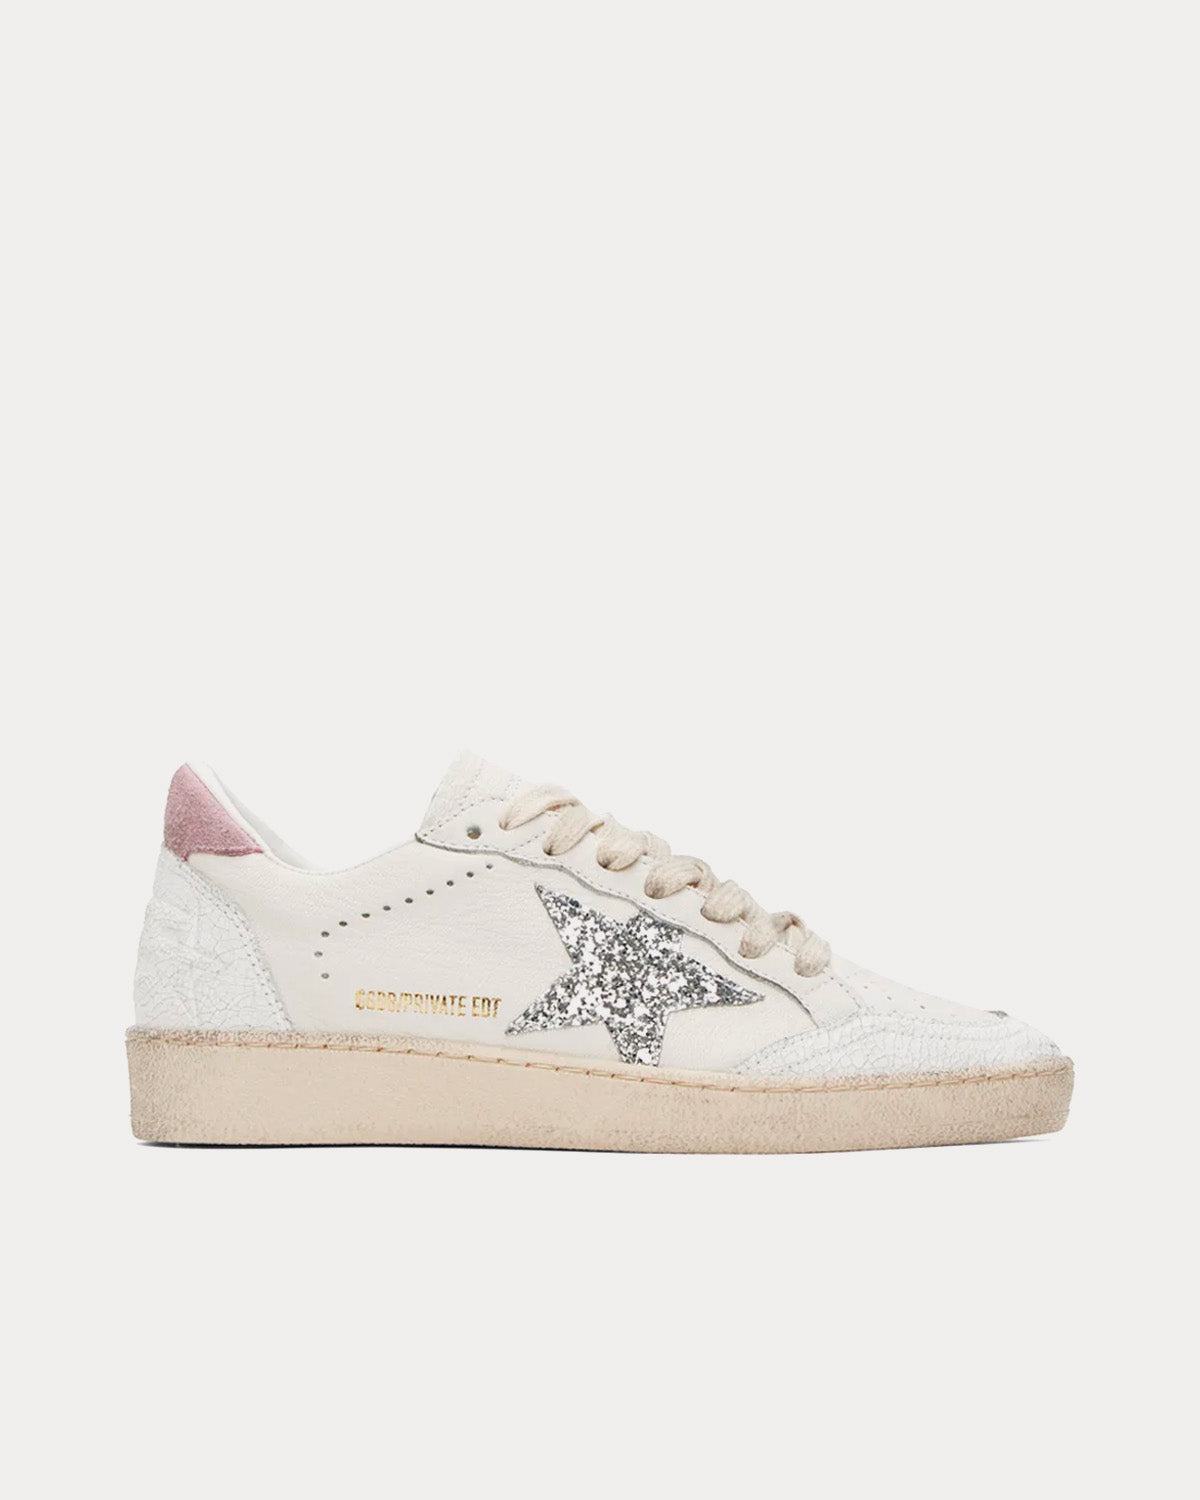 Golden Goose - Ball Star White / Silver / Ice Low Top Sneakers